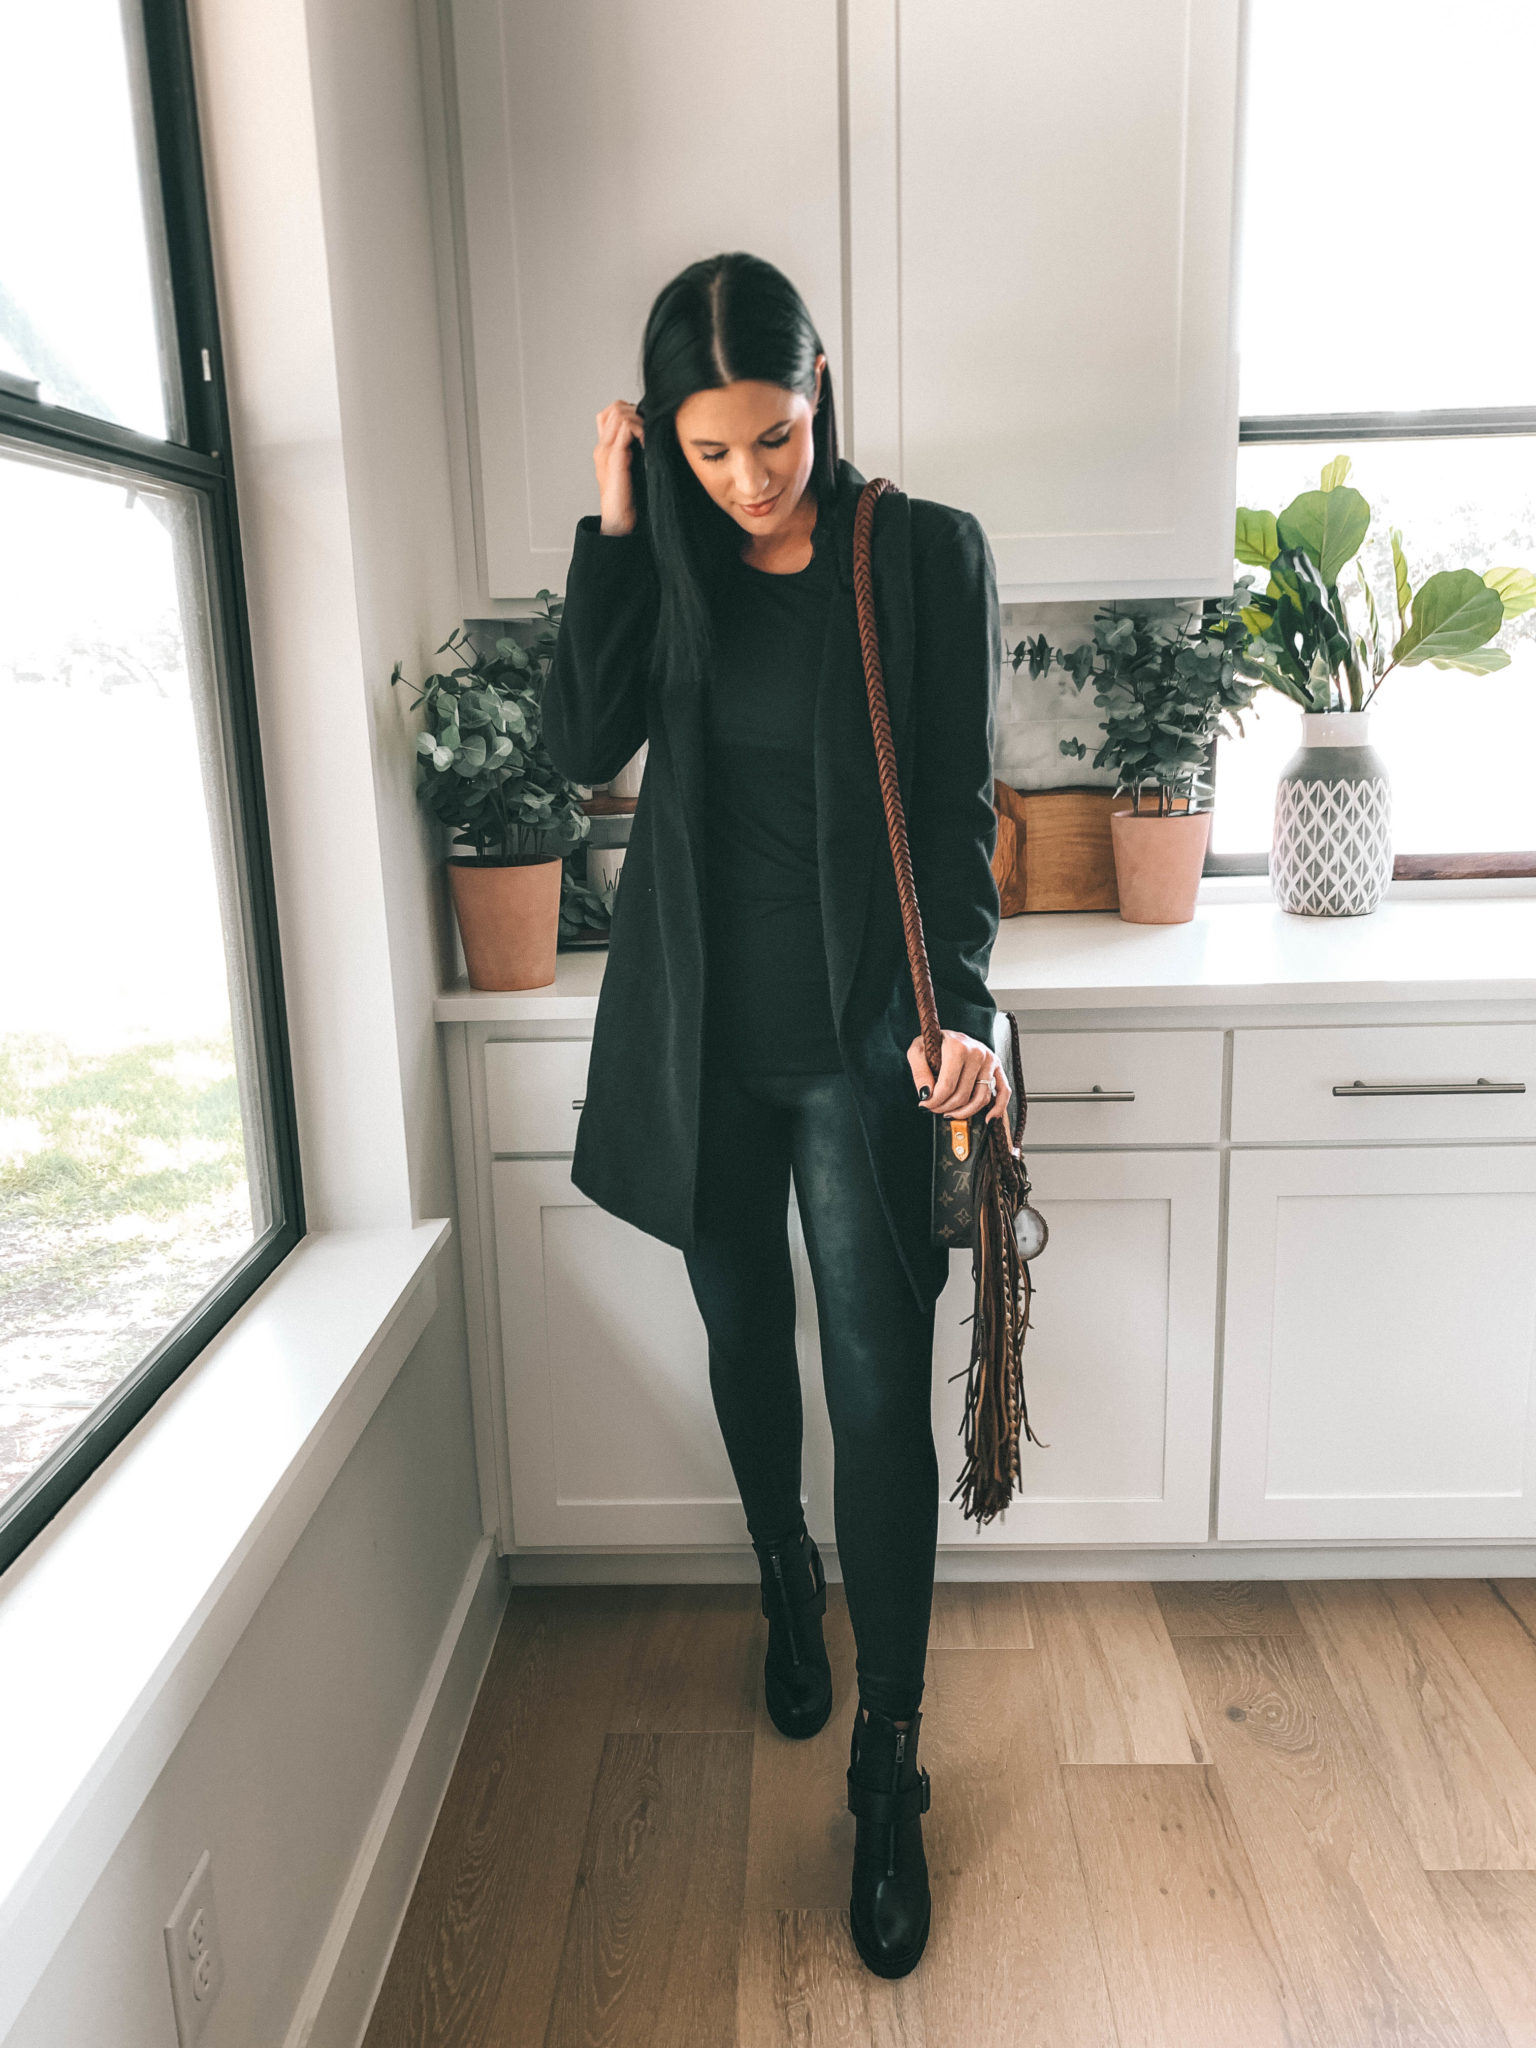 How to Style an All Black Outfit 3 Different Ways by popular Austin blog, Dressed to Kill: image of woman standing in her kitchen and wearing a black Halogen Double Face Coat, black Spanx Faux Leather Leggings, and carrying a World Traveler Dirty Blonde purse.